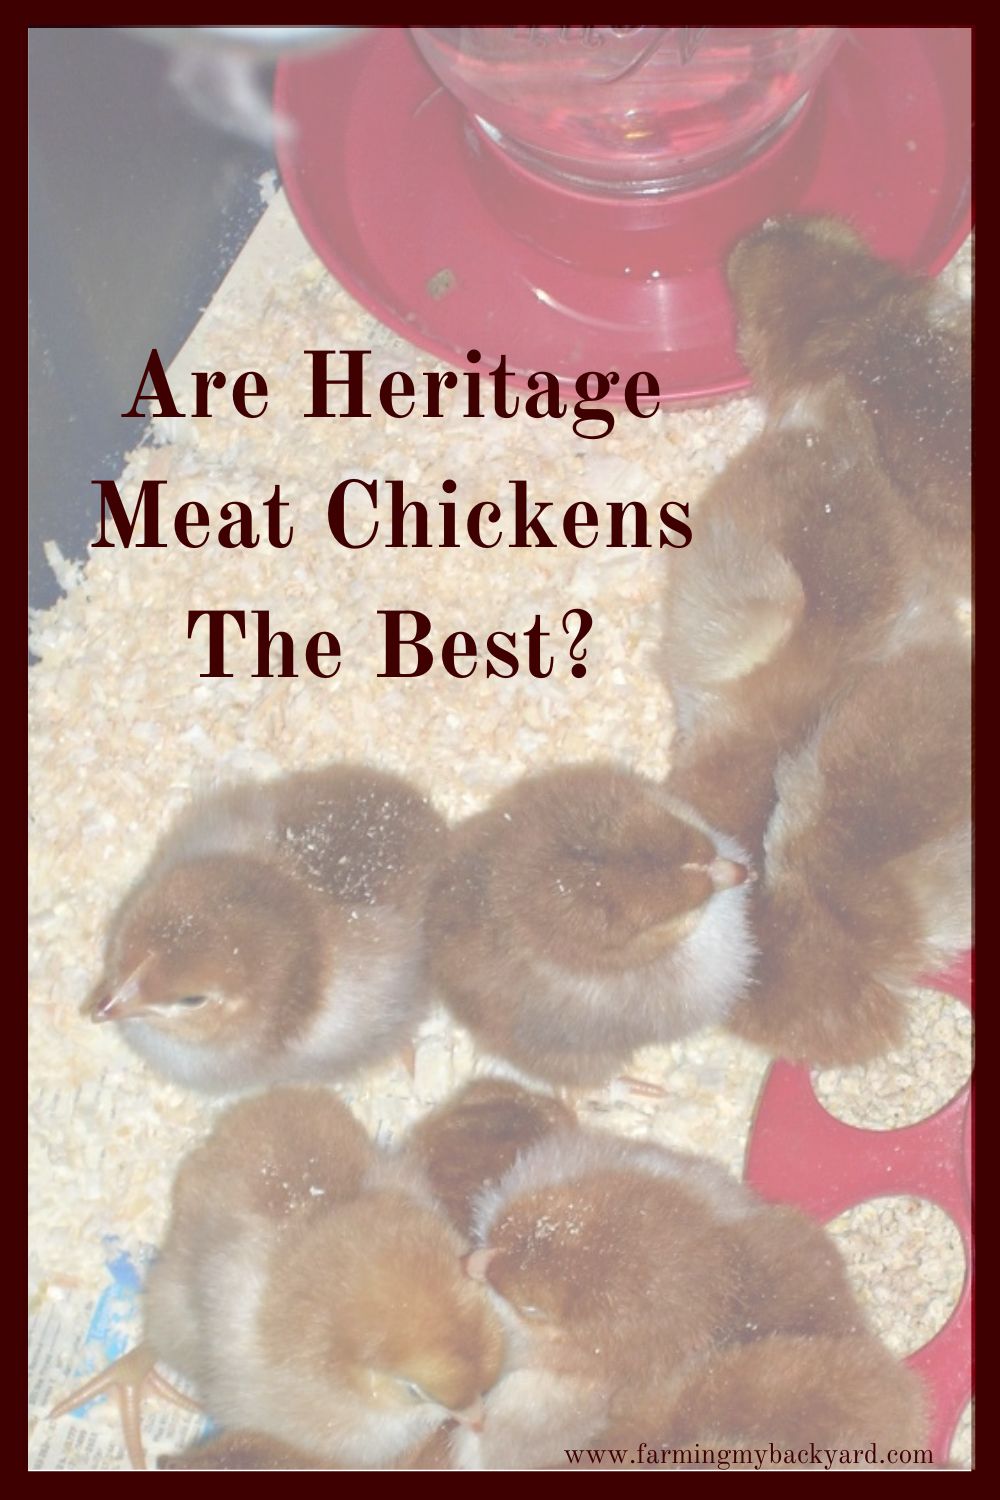 There are advantages and disadvantages to raising heritage meat chickens instead of the popular Cornish Cross broilers.